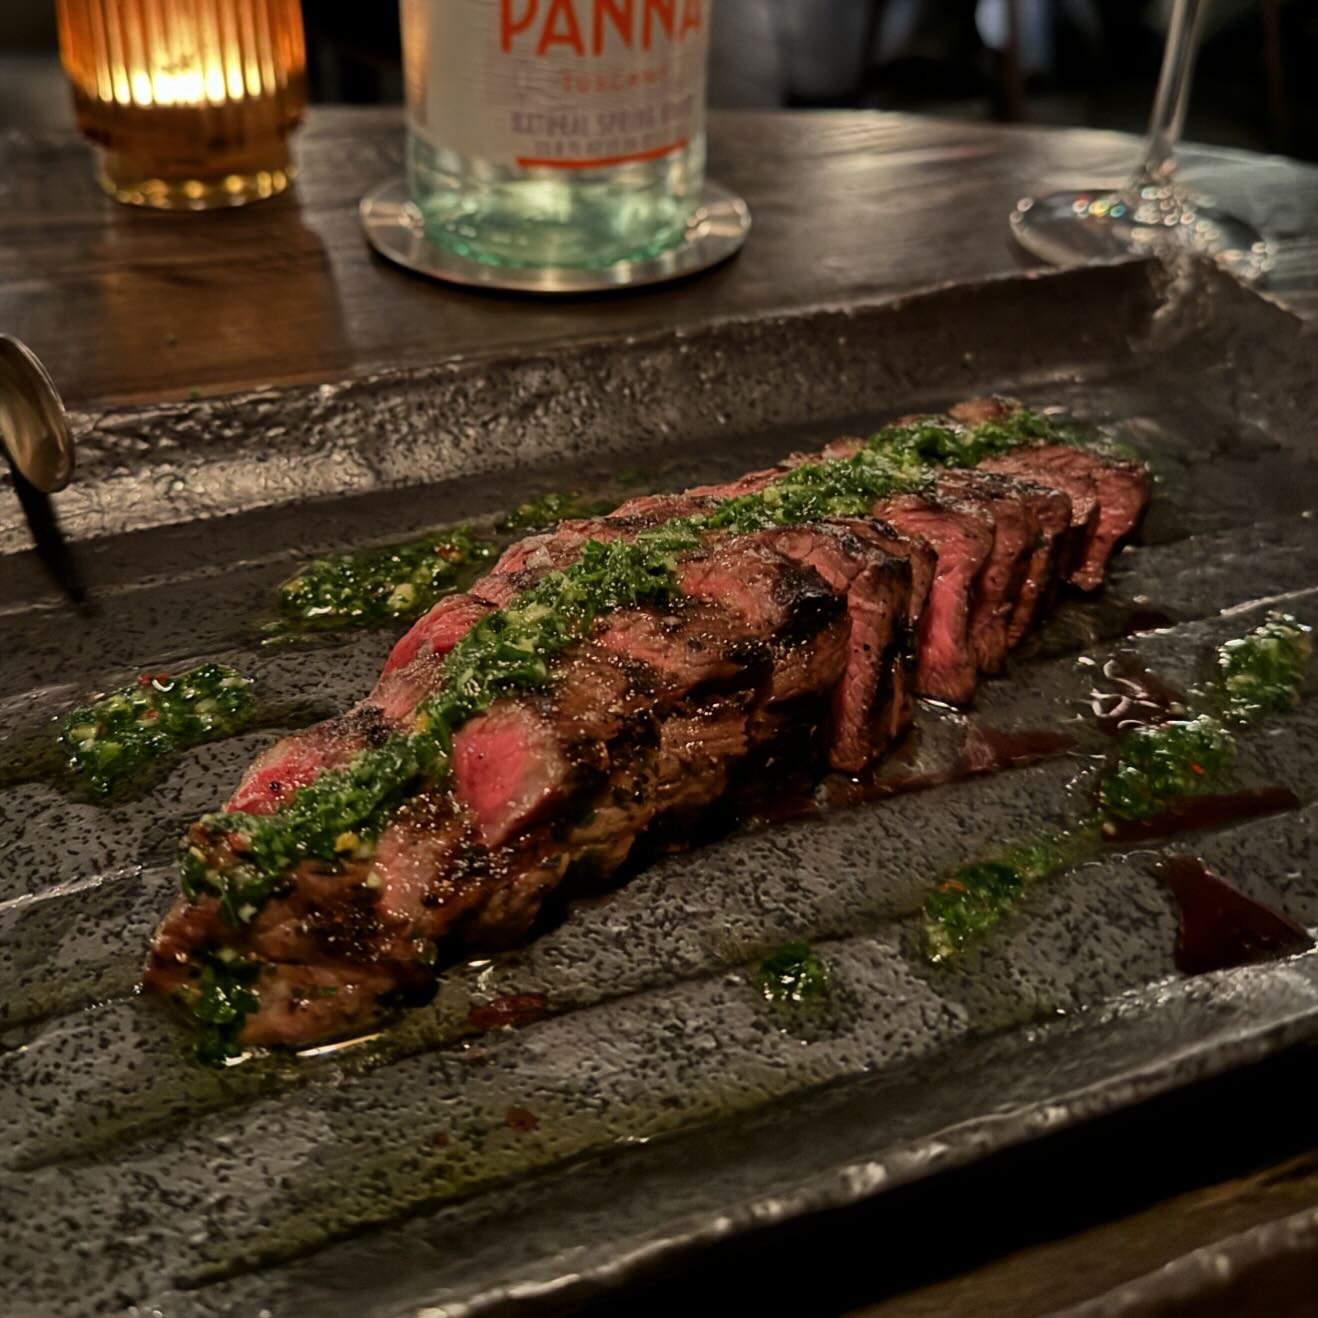 The Coulotte. Delicious new addition to our growing Wagyu Beef Selection, topped with a Citrus Gremolata.